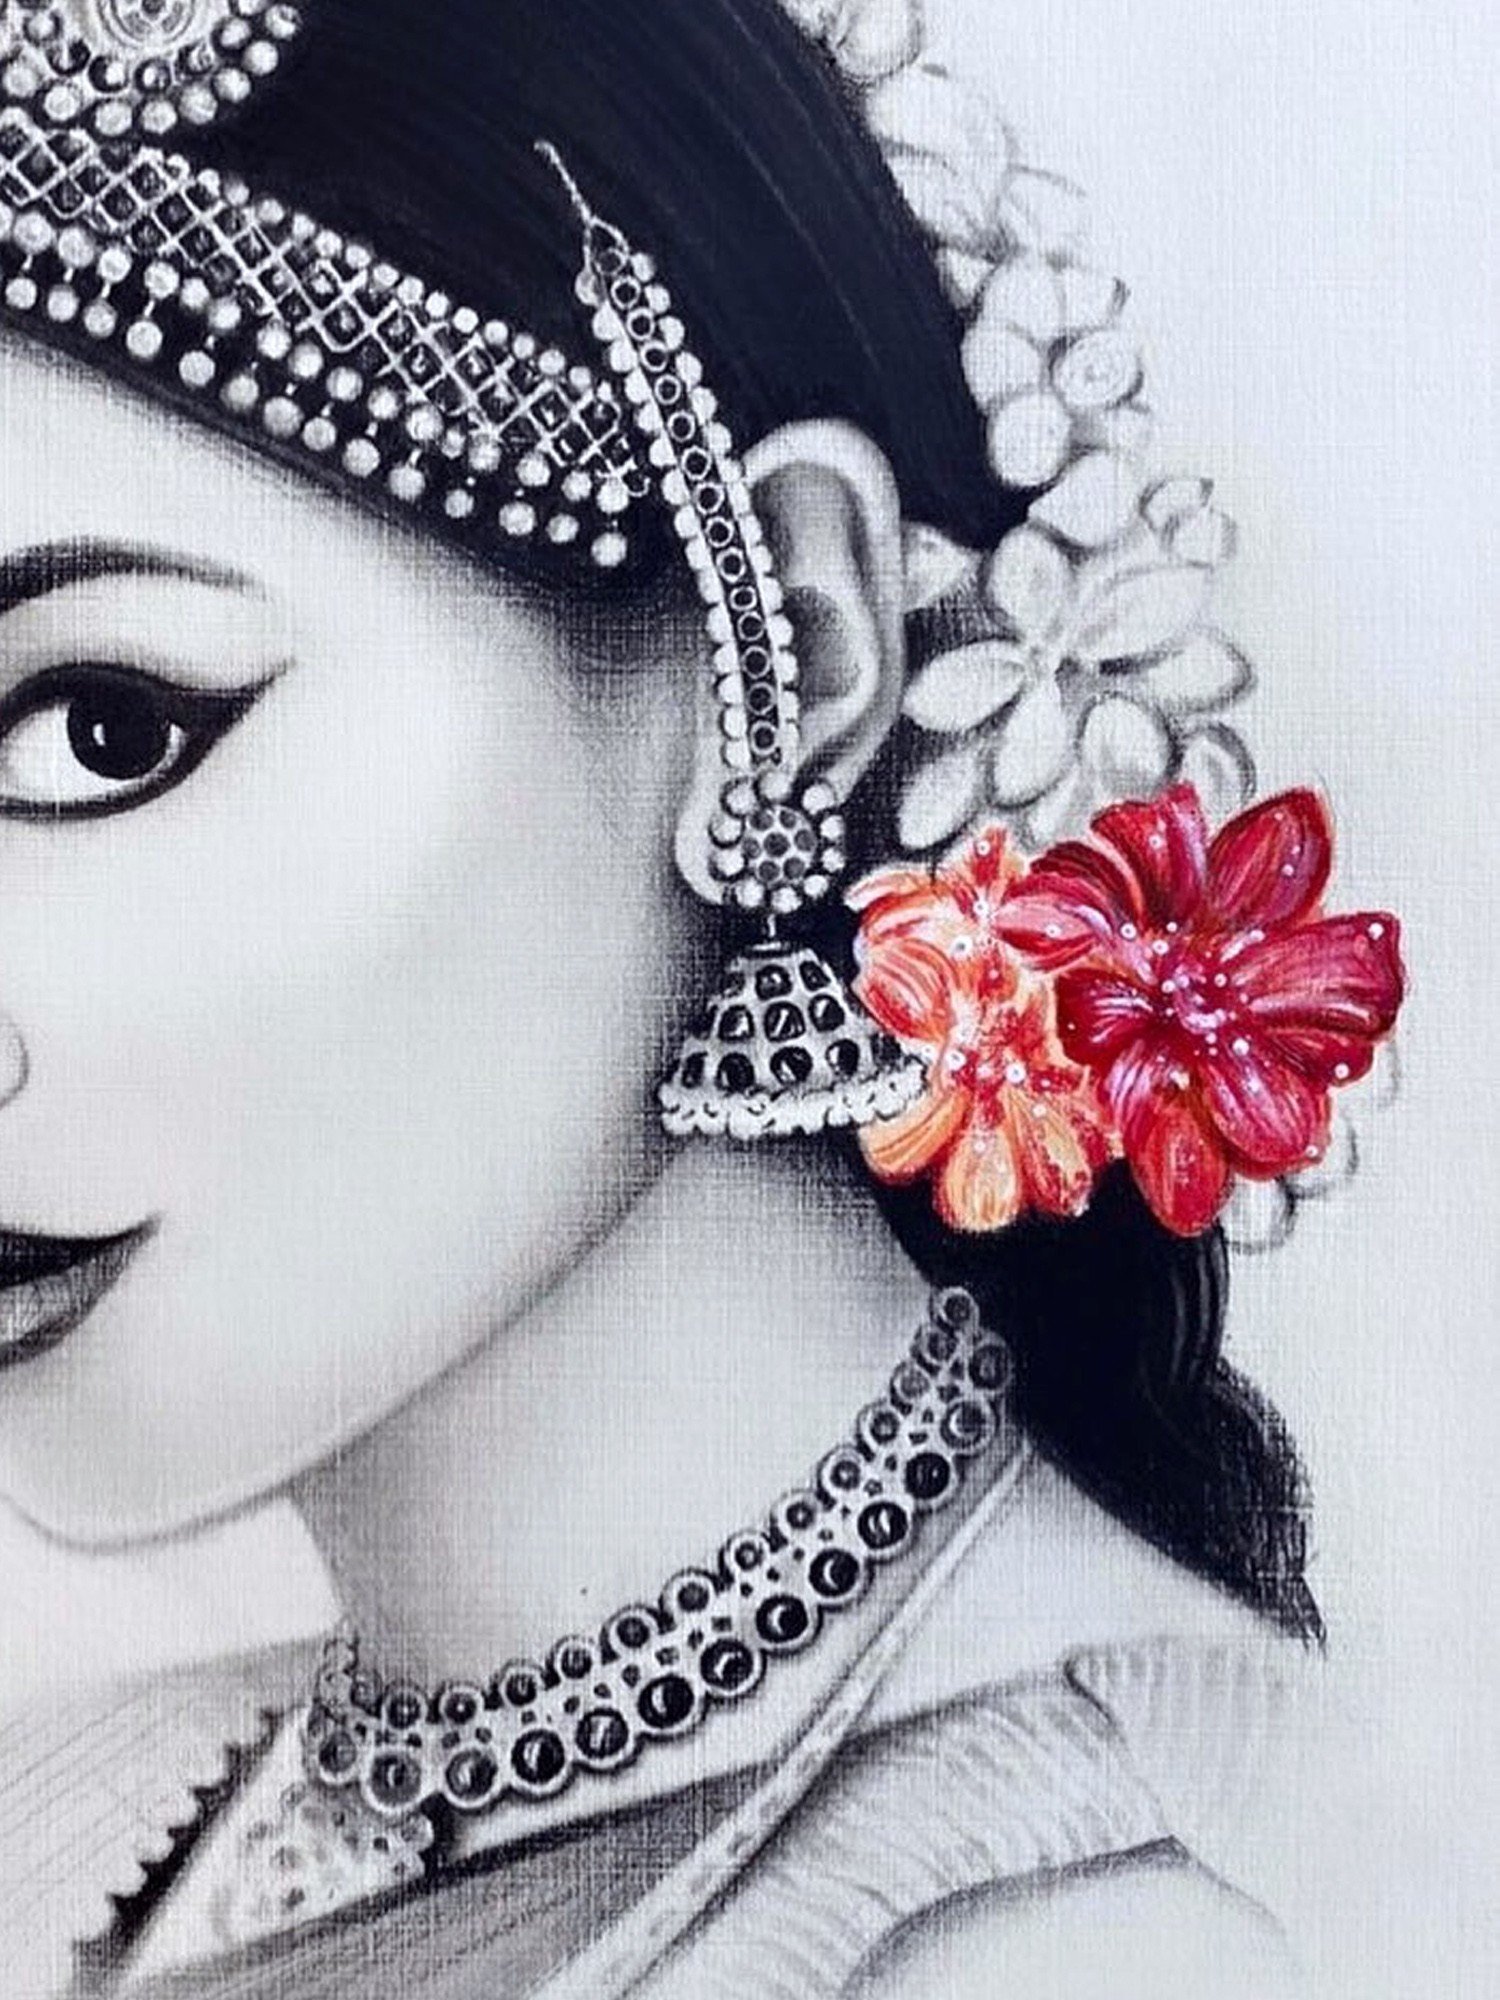 Arts collection kshama - Traditional bride https://youtu.be/PQAq87CUnBw . .  . #Doodle art #IndianBride #fashionillustration #How to draw a Traditional  Girl #How to draw a beautiful traditional girl #easy pencil drawing  #girldrawing #IndianWomanDrawing #